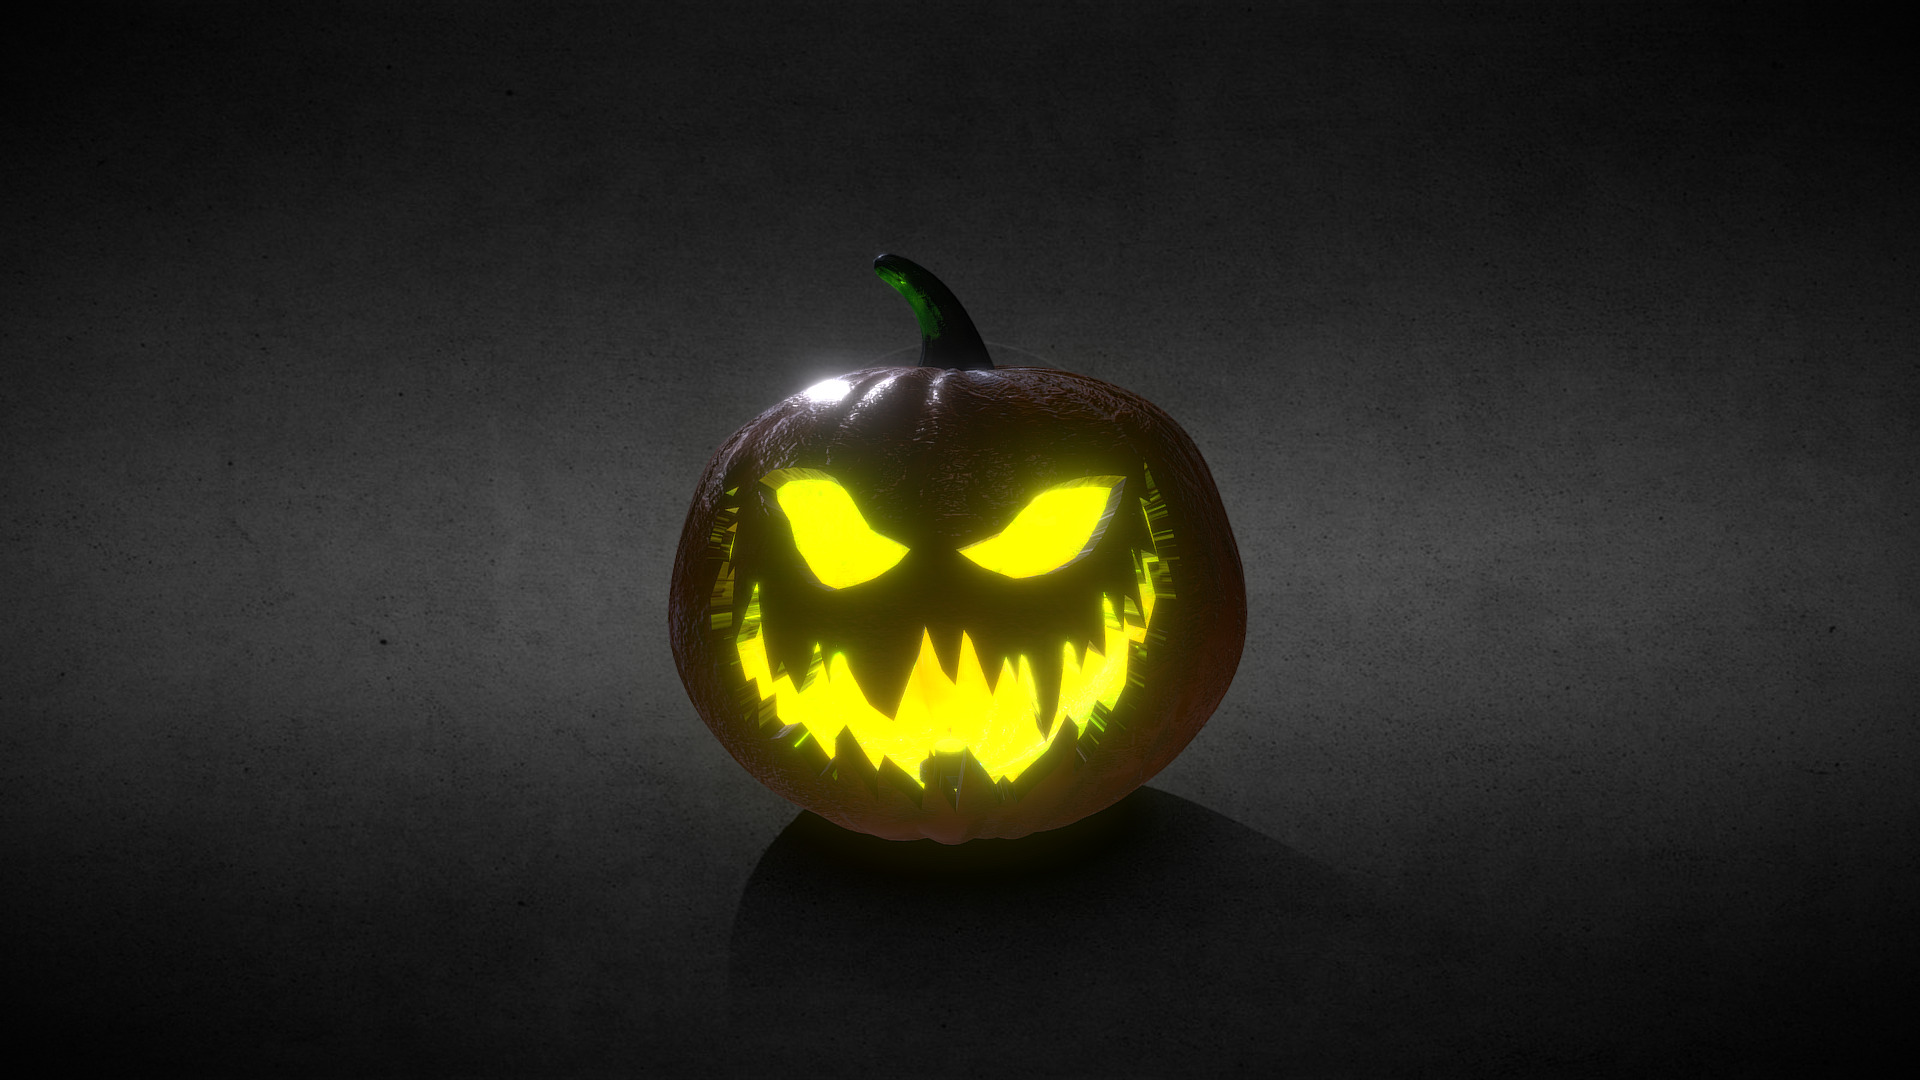 3D model Halloween Jack-o-Lantern Greenish Fire Low Poly - This is a 3D model of the Halloween Jack-o-Lantern Greenish Fire Low Poly. The 3D model is about a carved pumpkin on a table.